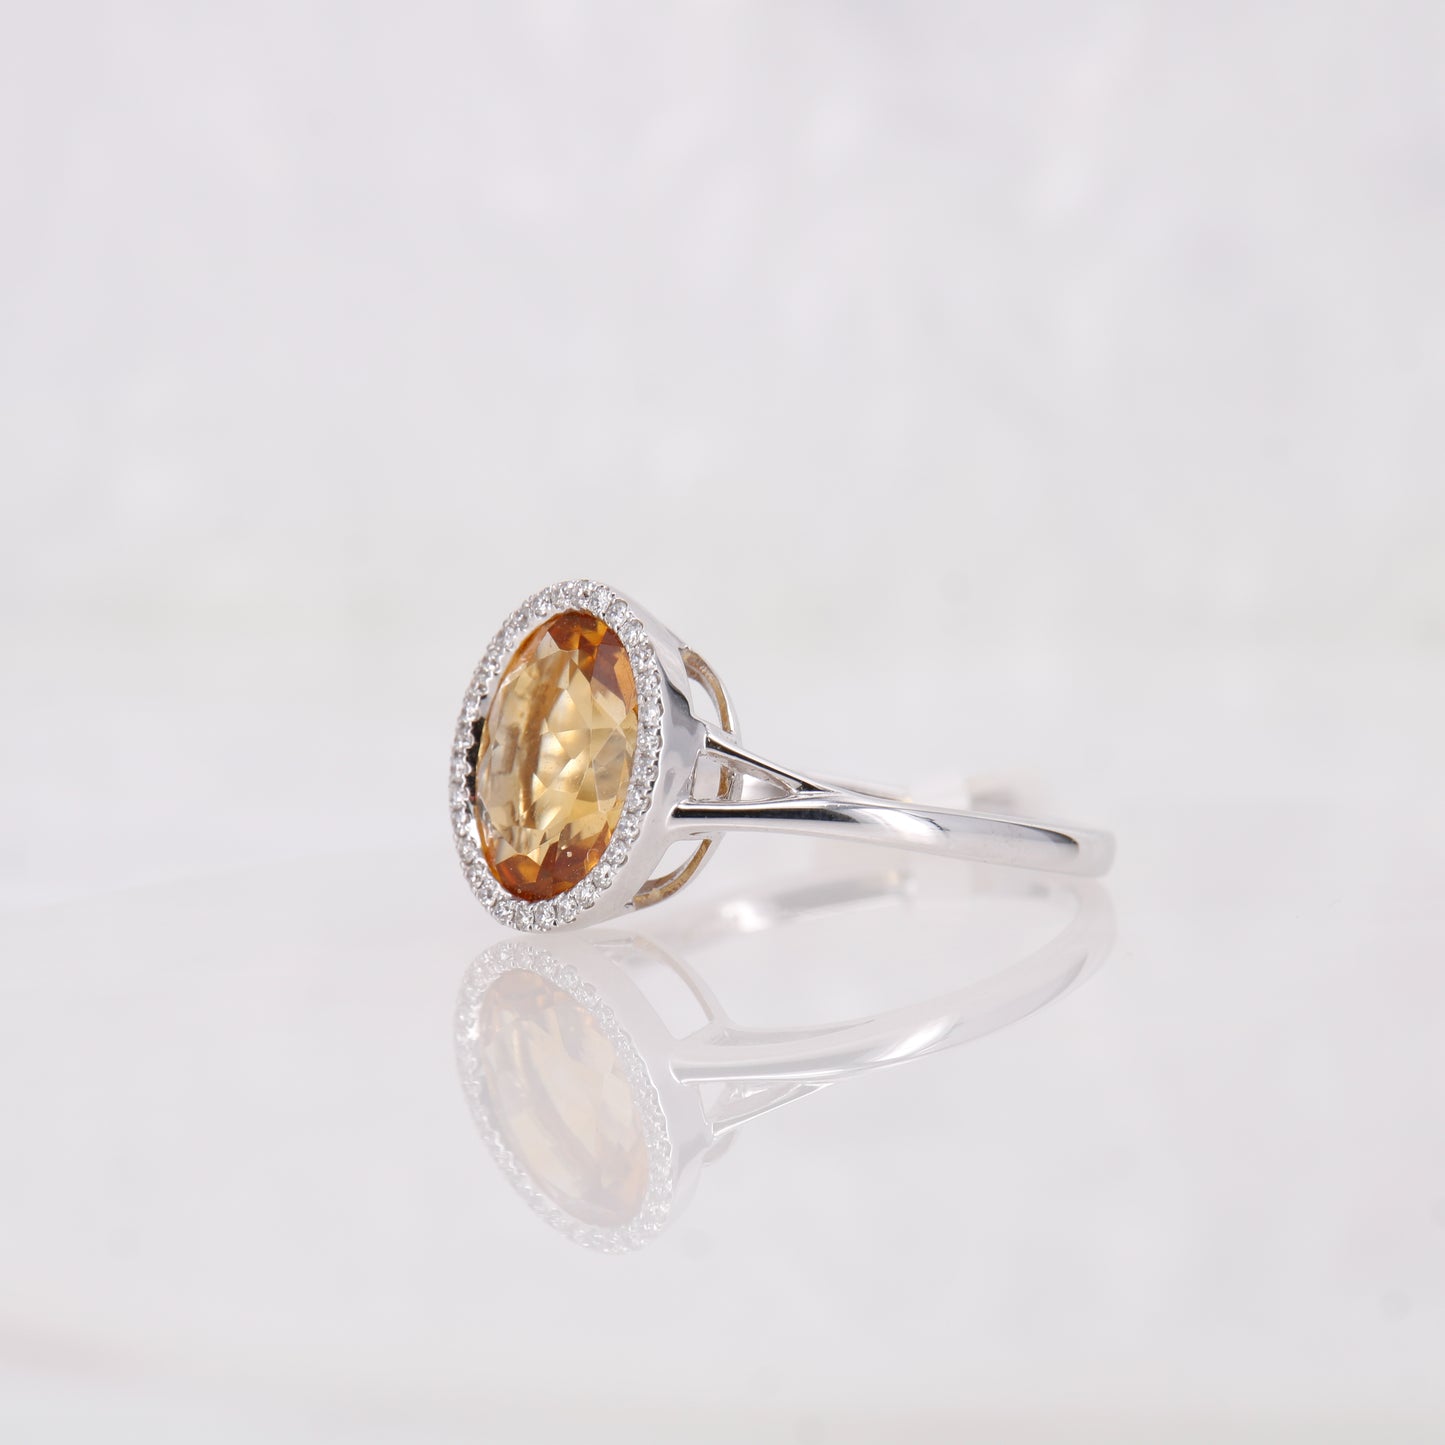 18ct White Gold Oval Cut Citrine and Diamond Ring